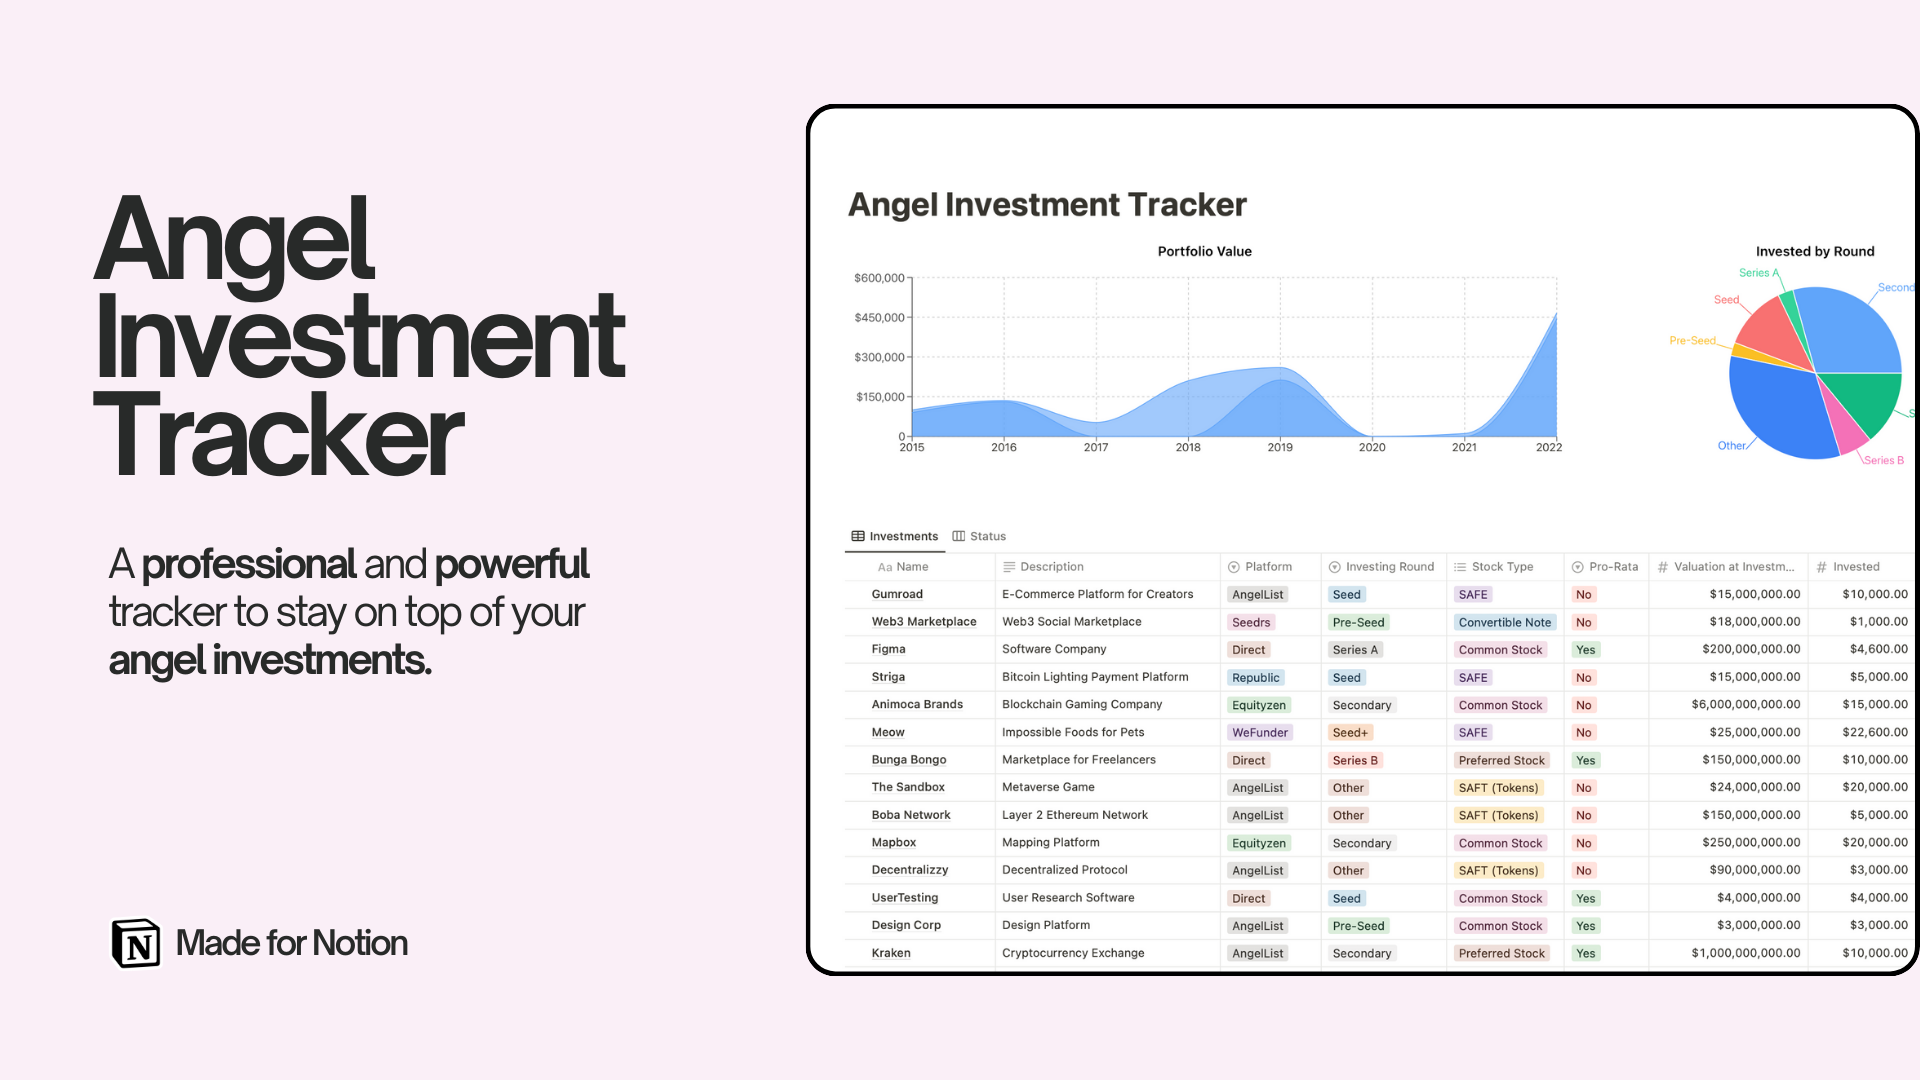 This powerful tracker template for Notion is the perfect way to stay on top of your angel investments. Keep track of the companies you have invested in, at what valuations, how much your portfolio is worth, and much more. This tracker is a must-have tool for angel investors!